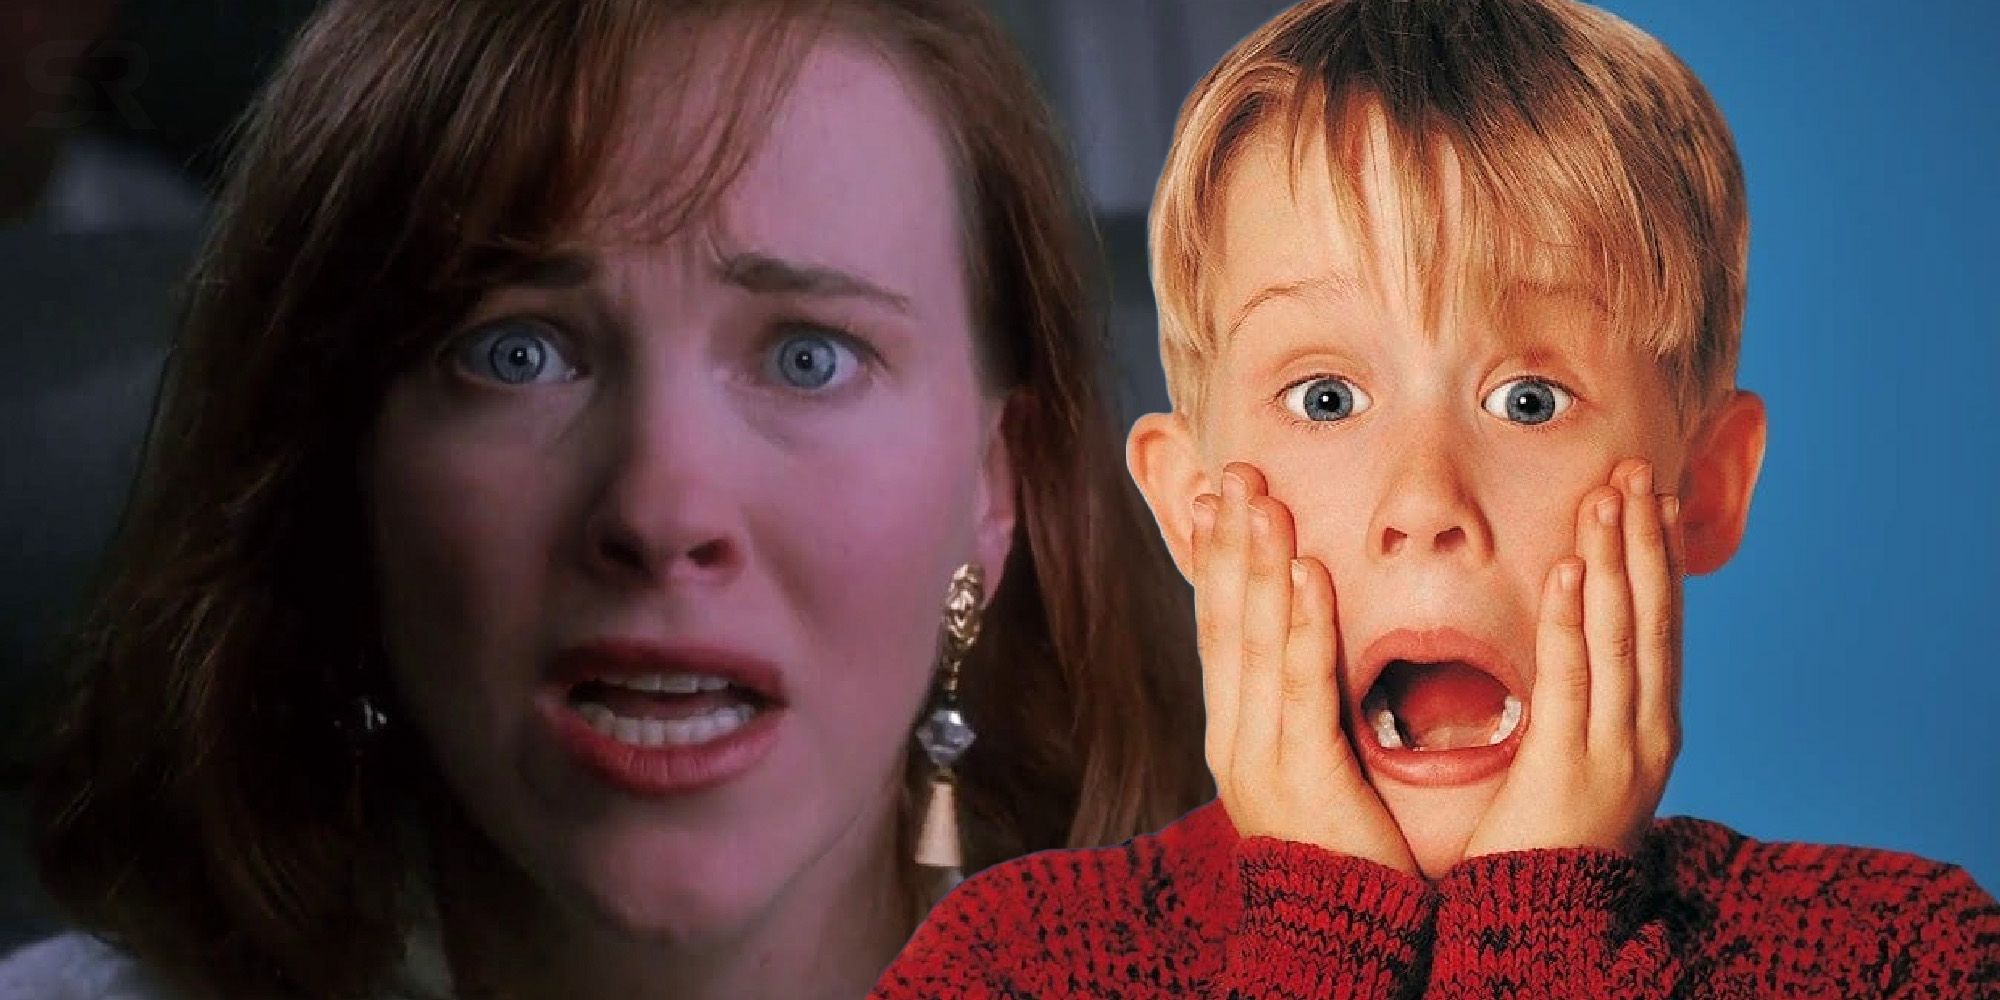 Home alone Kevin and mrs Mcallister